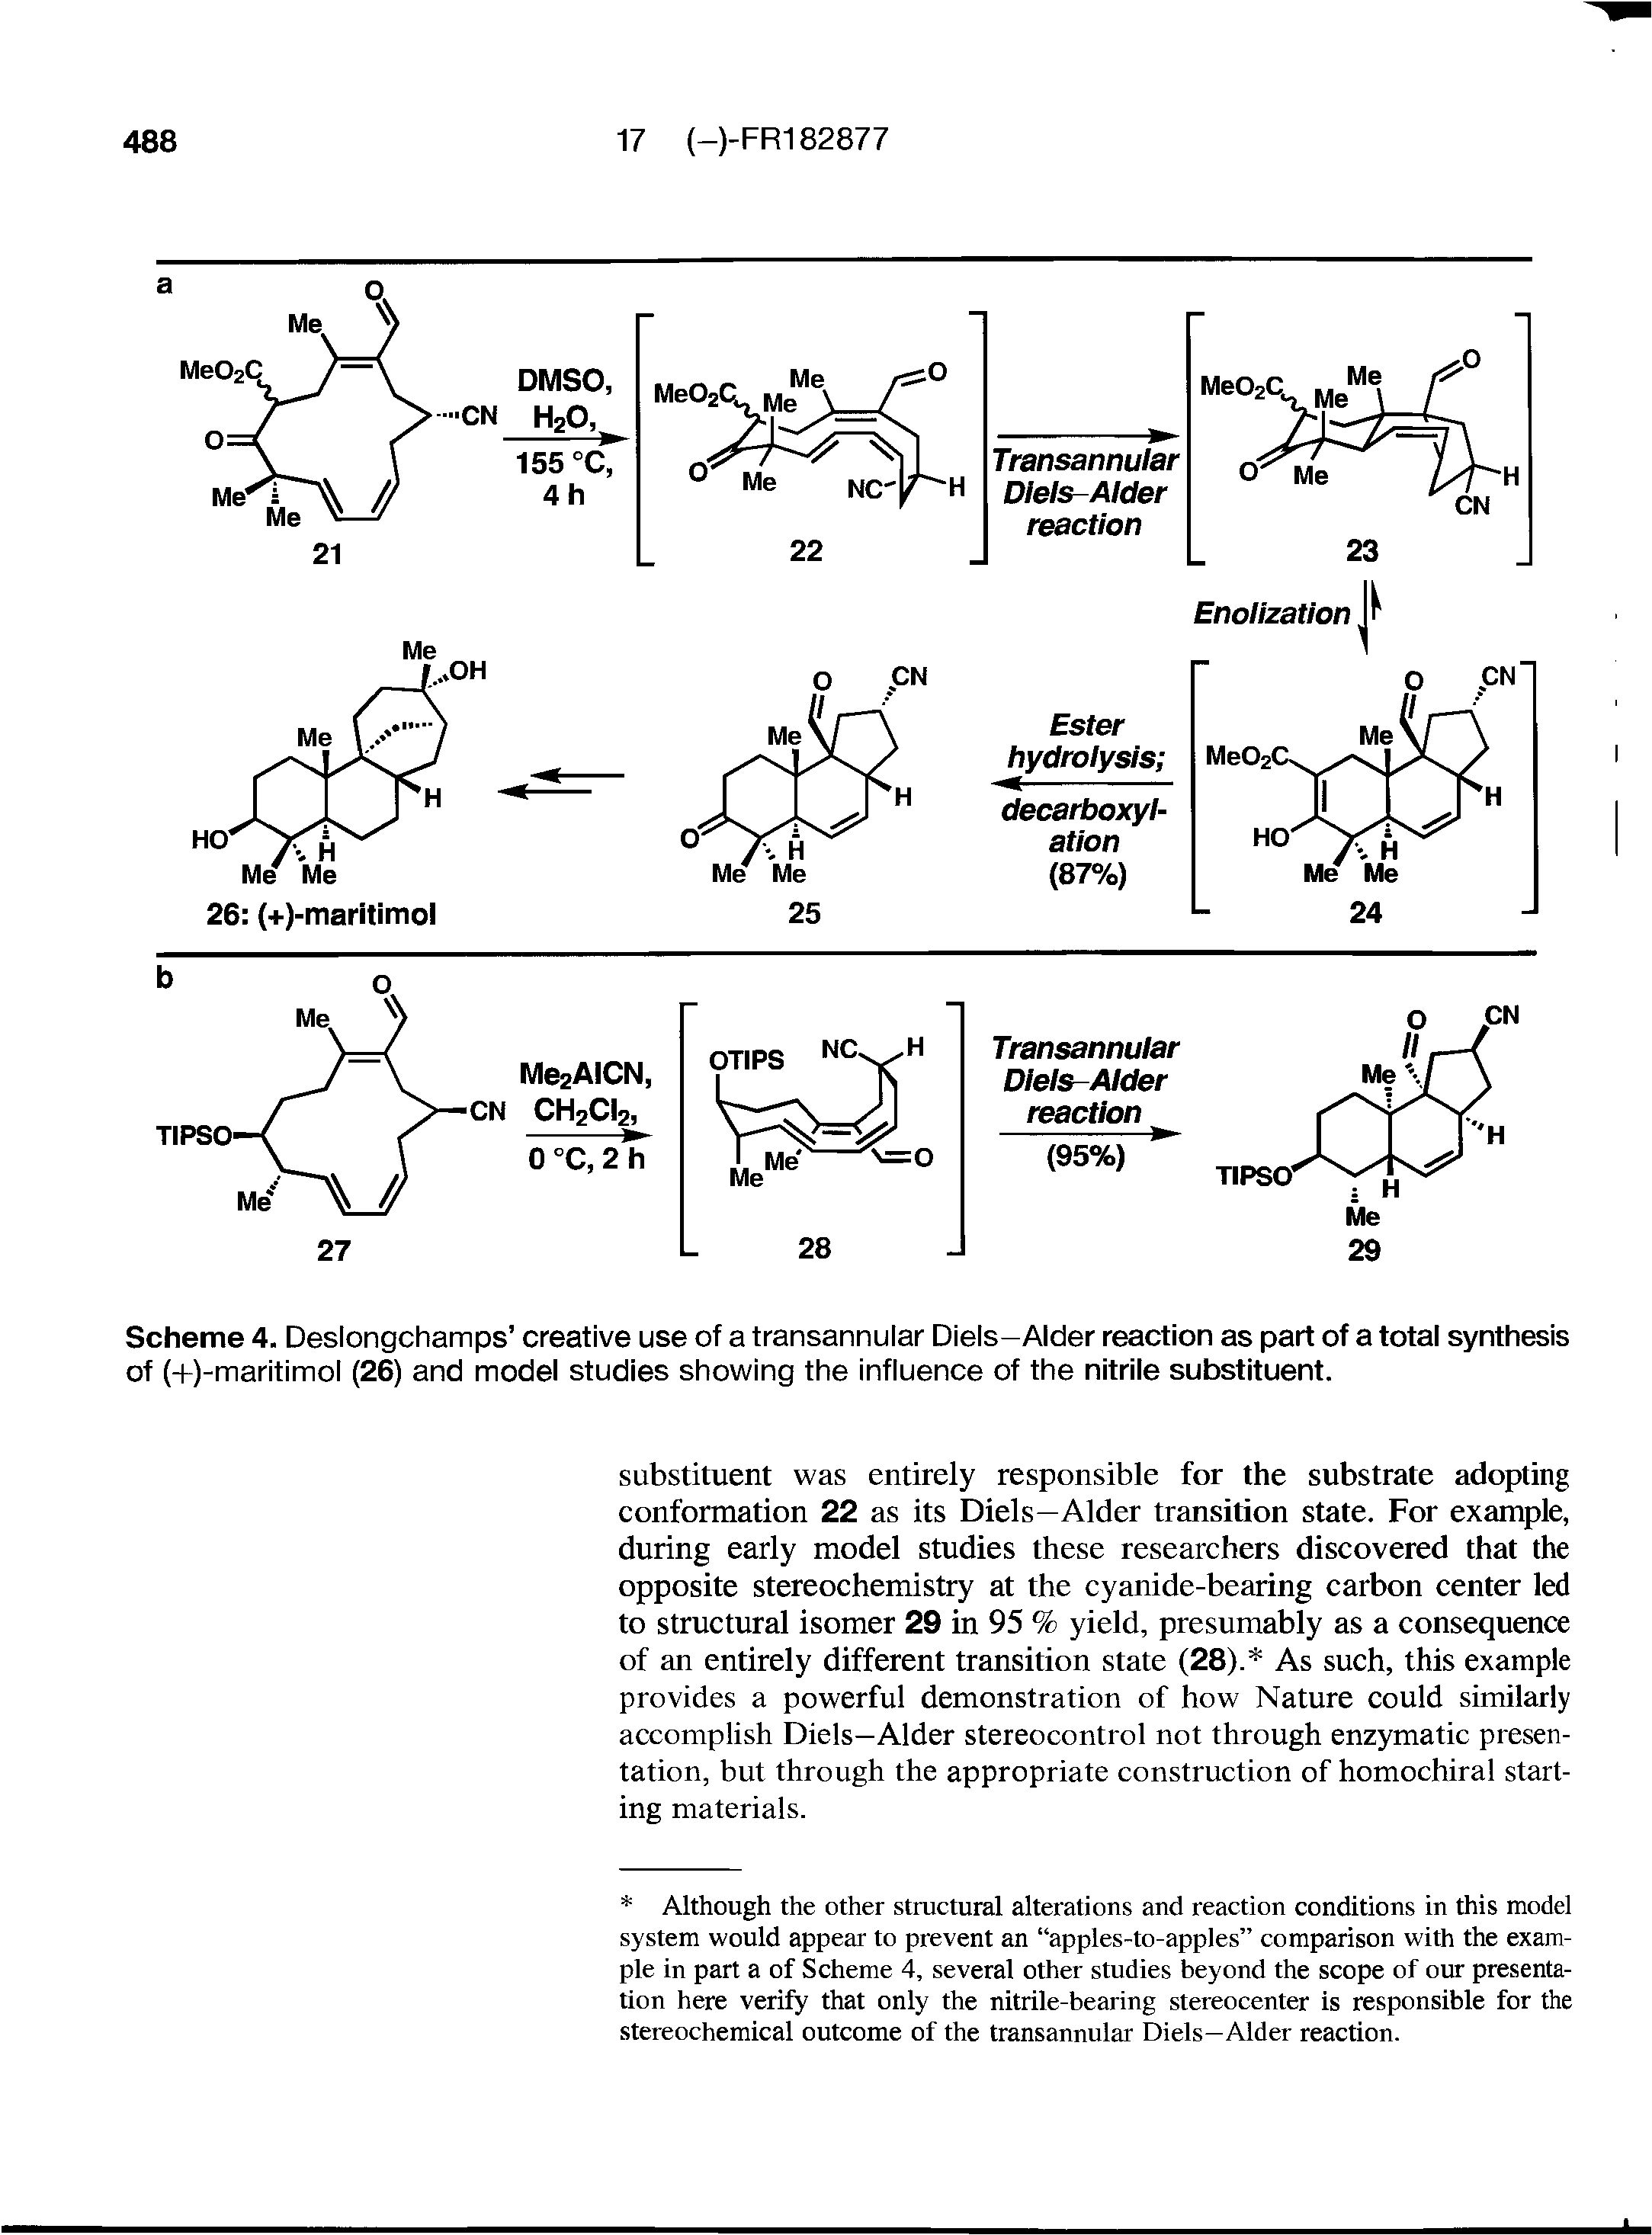 Scheme 4. Deslongchamps creative use of a transannular Diels-Alder reaction as part of a total synthesis of (+)-maritimol (26) and model studies showing the influence of the nitrile substituent.